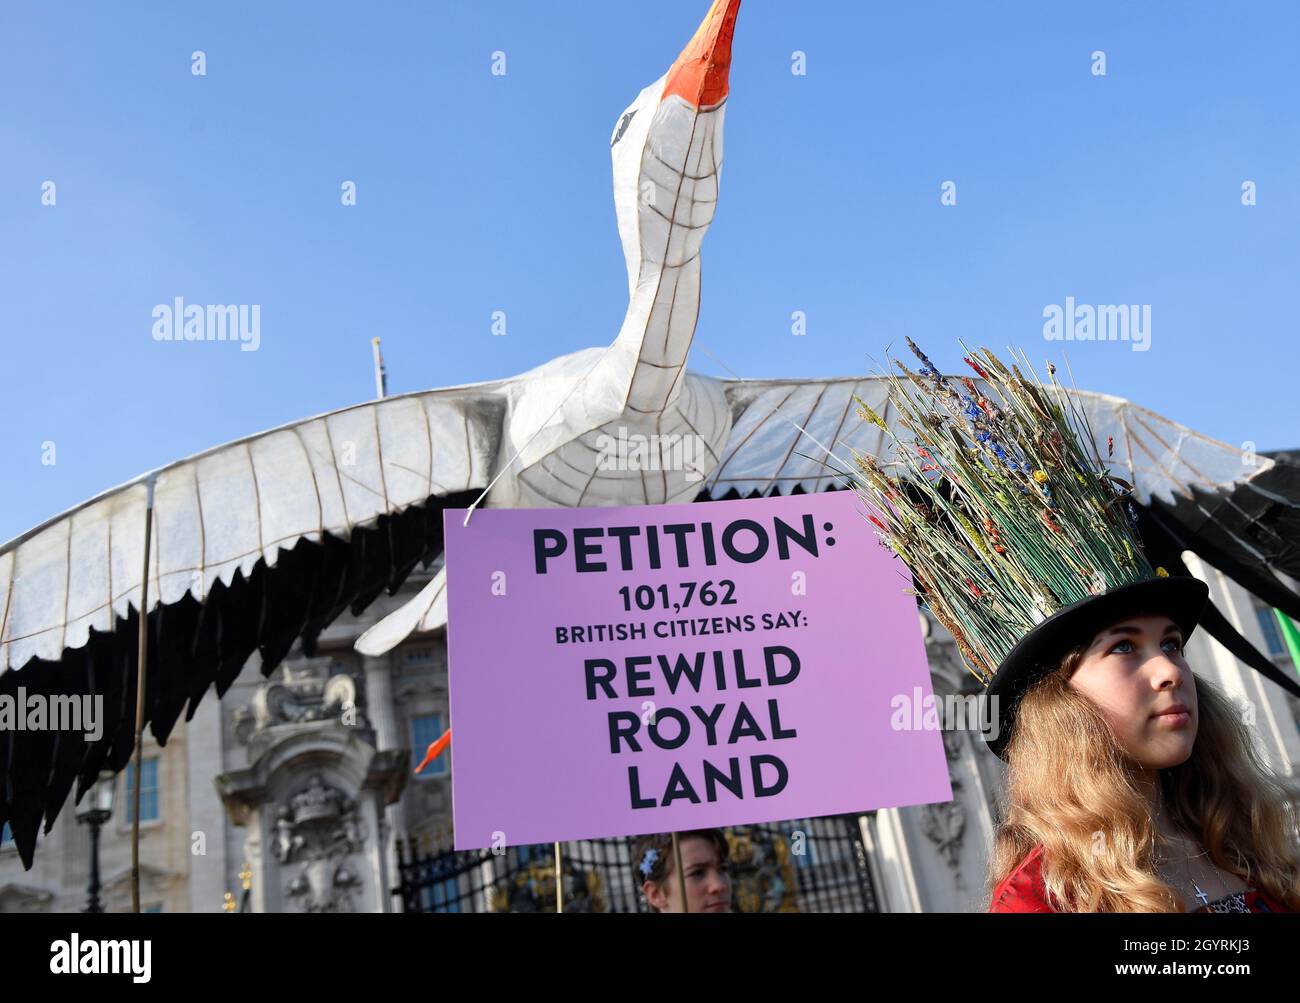 An environmental campaigner takes part in a march and delivery of a petition to the Buckingham Palace, demanding that the British royal family rewild their land, ahead of the COP26 climate summit due to take place in November, in London, Britain, October 9, 2021. REUTERS/Toby Melville Stock Photo